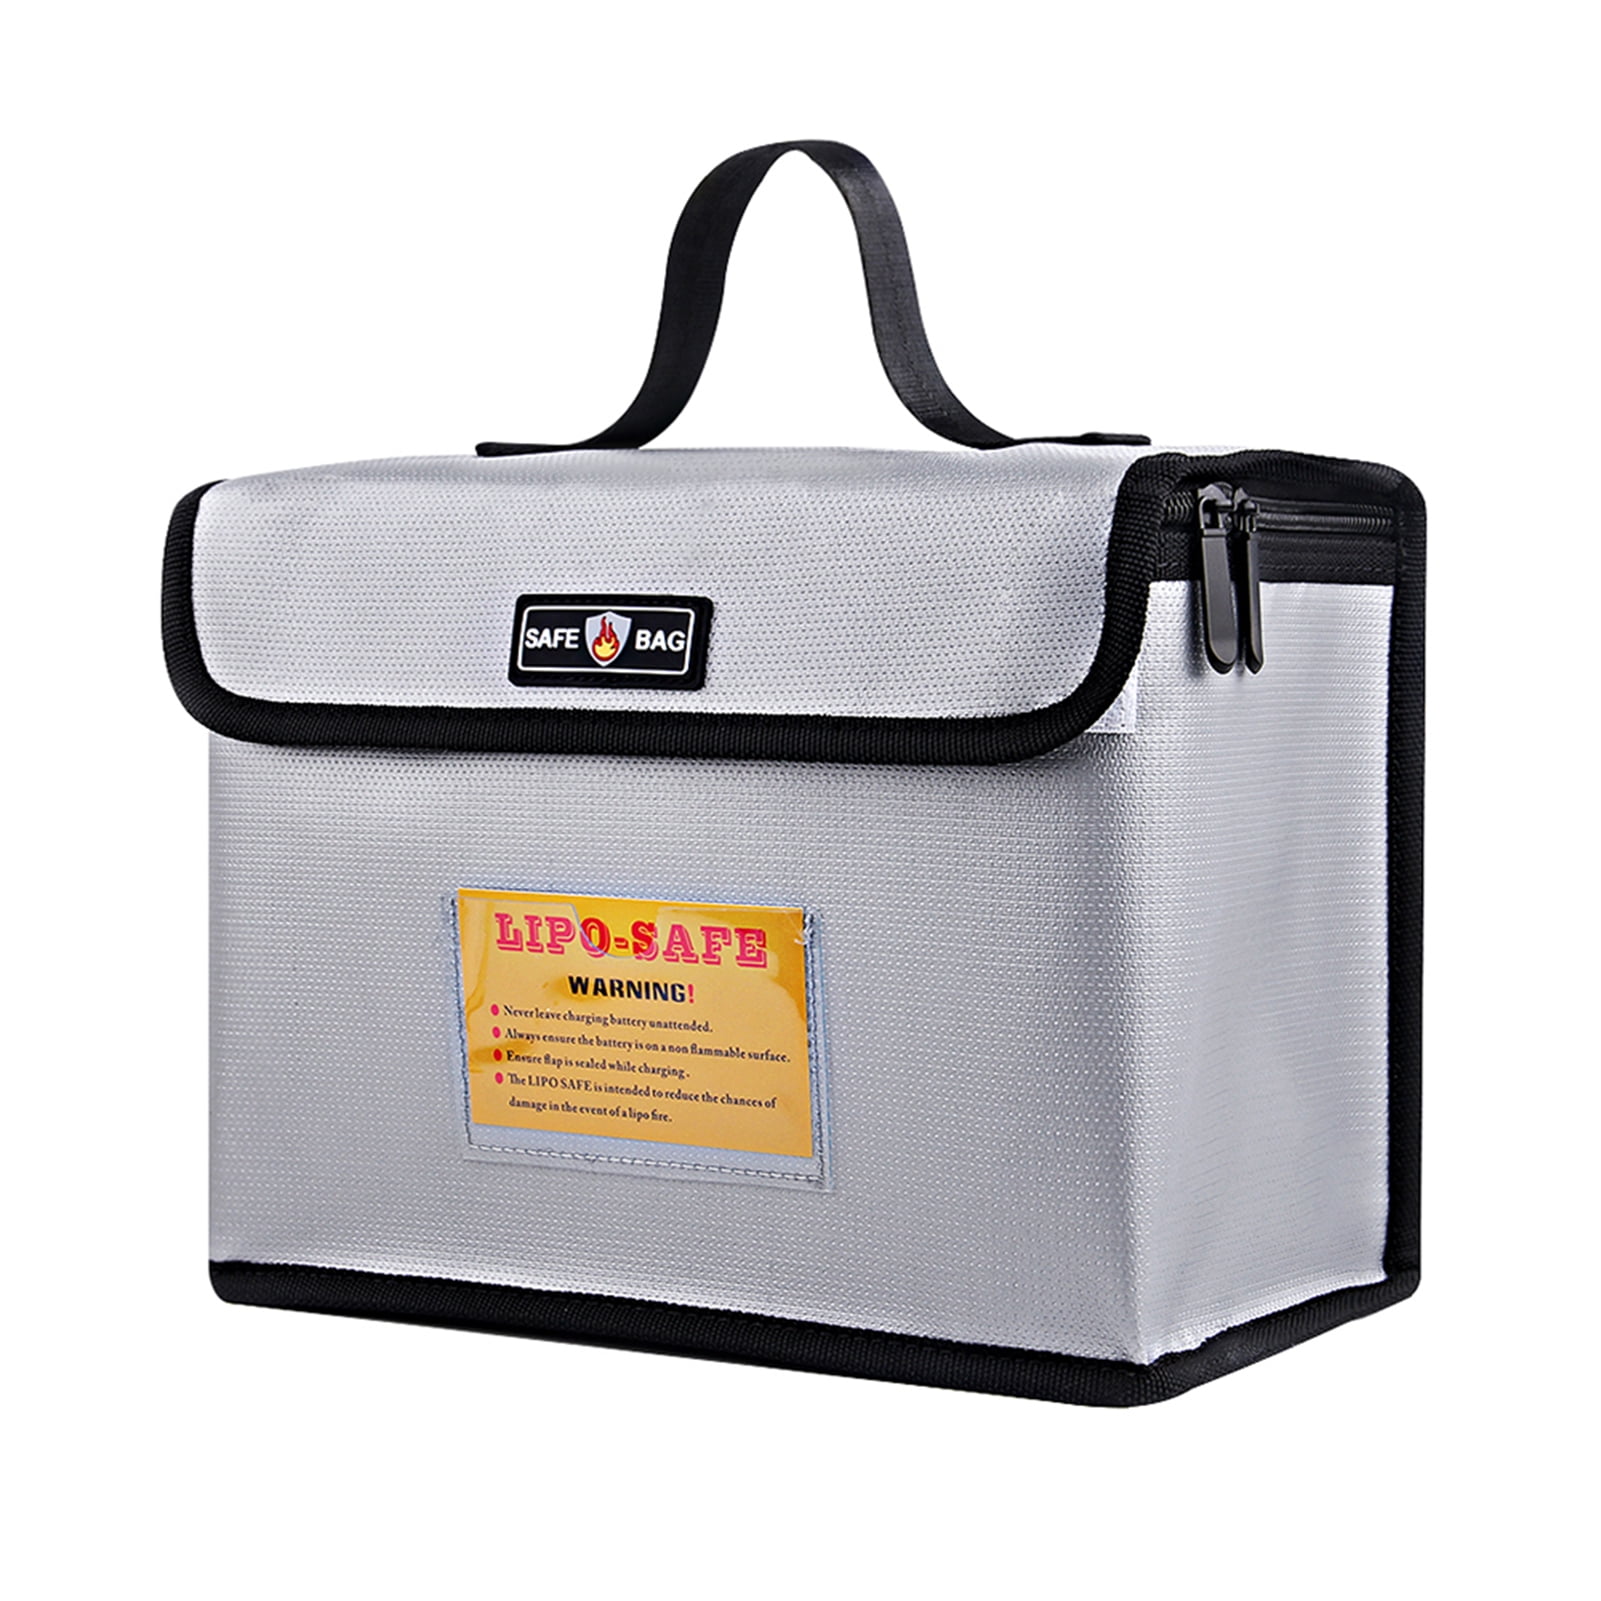 Silver Fire Resistant Explosion Proof Lipo Battery Guard Envelope Bag for Safe